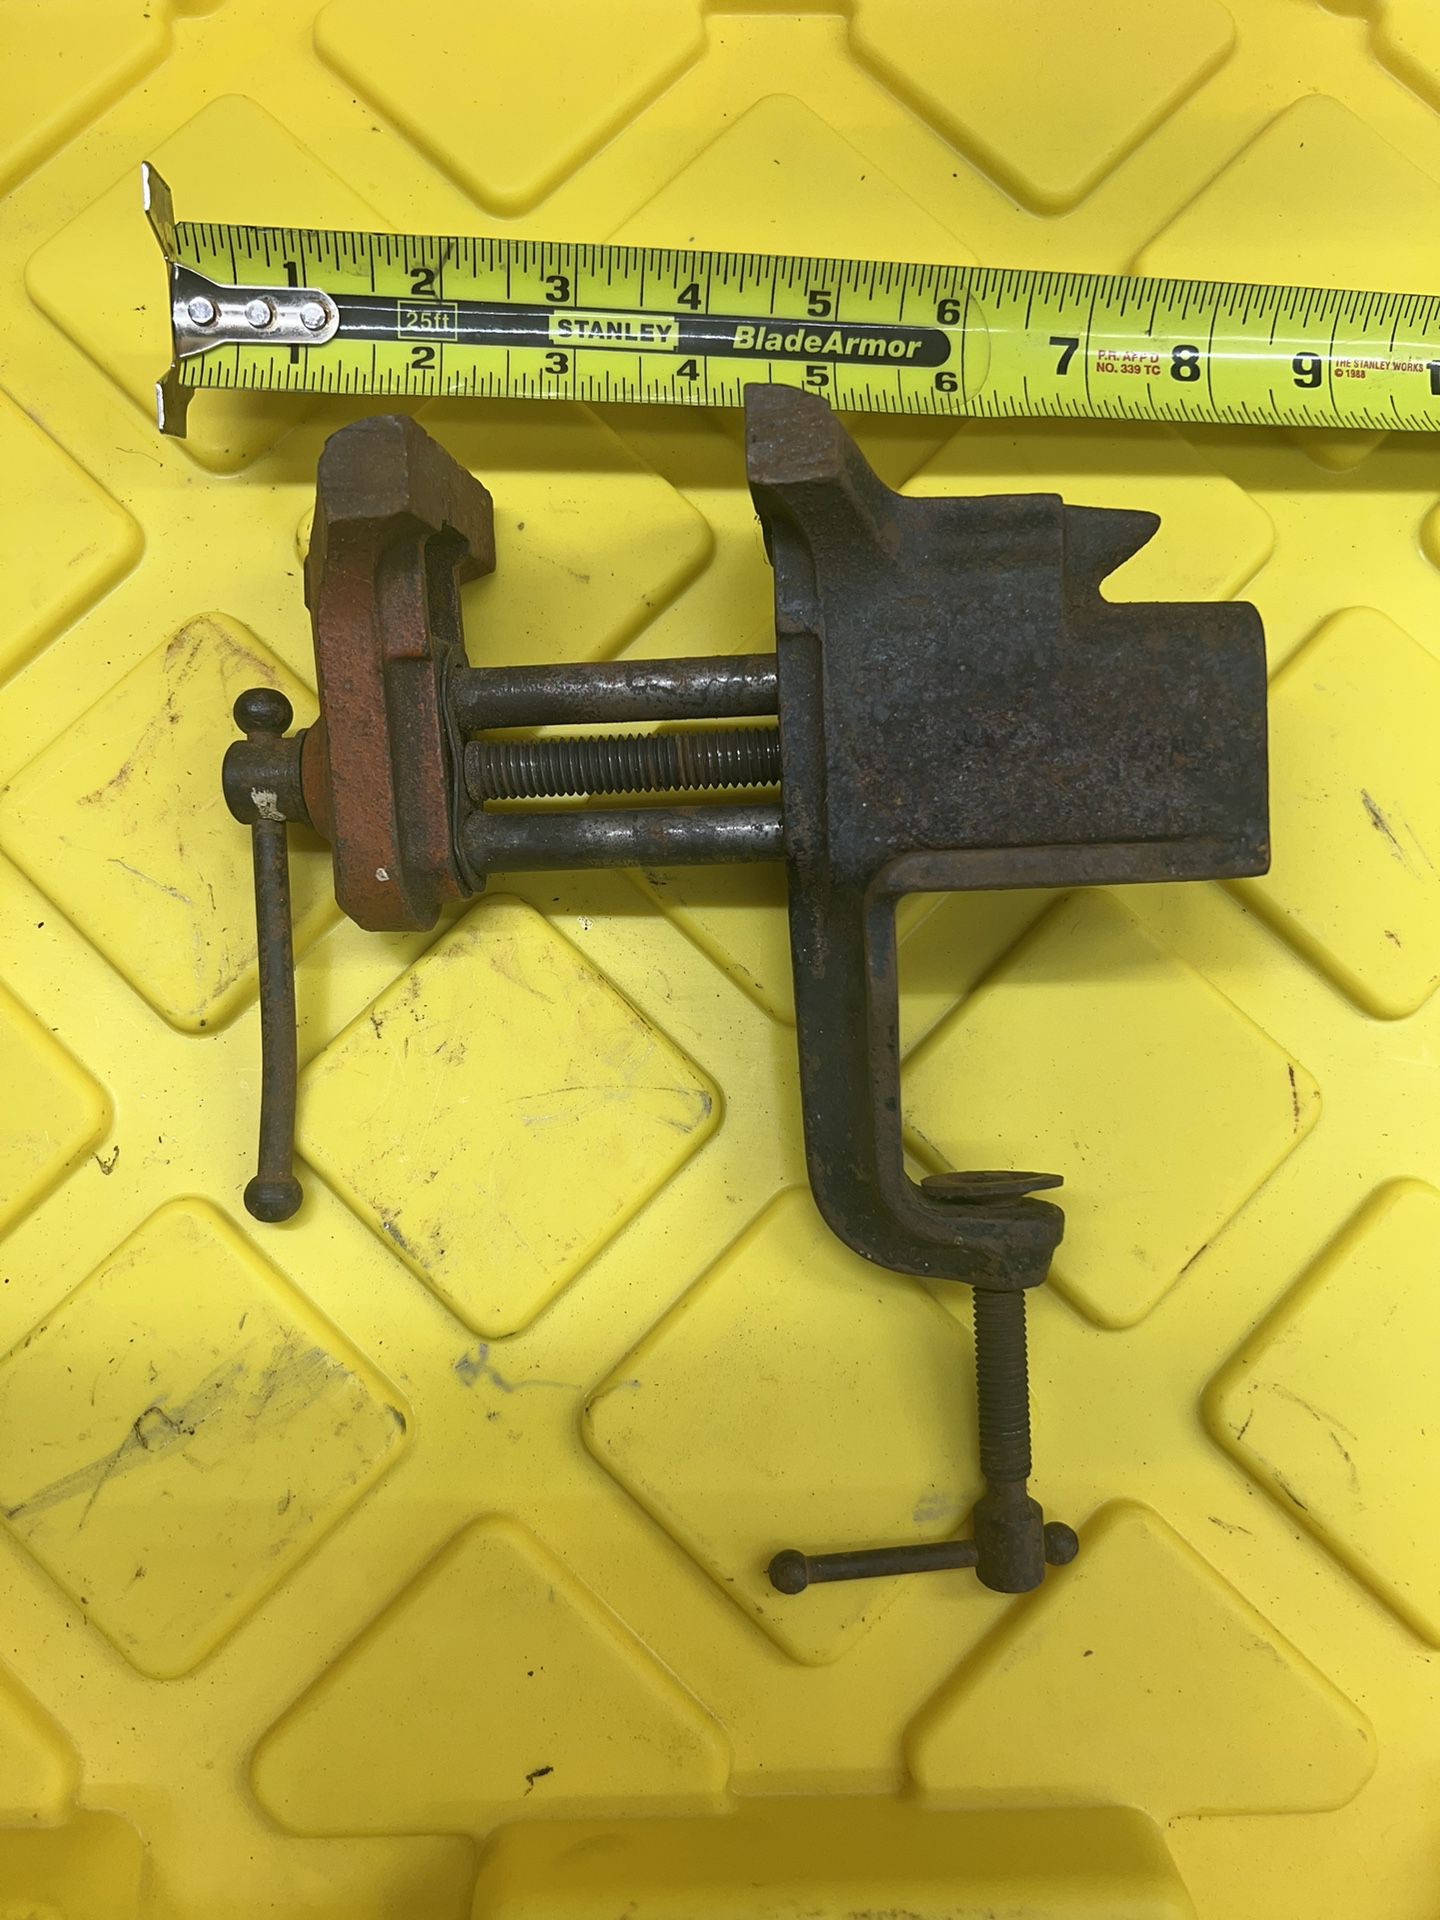 Small Stanley Working Vise - Nice Restoration Project 